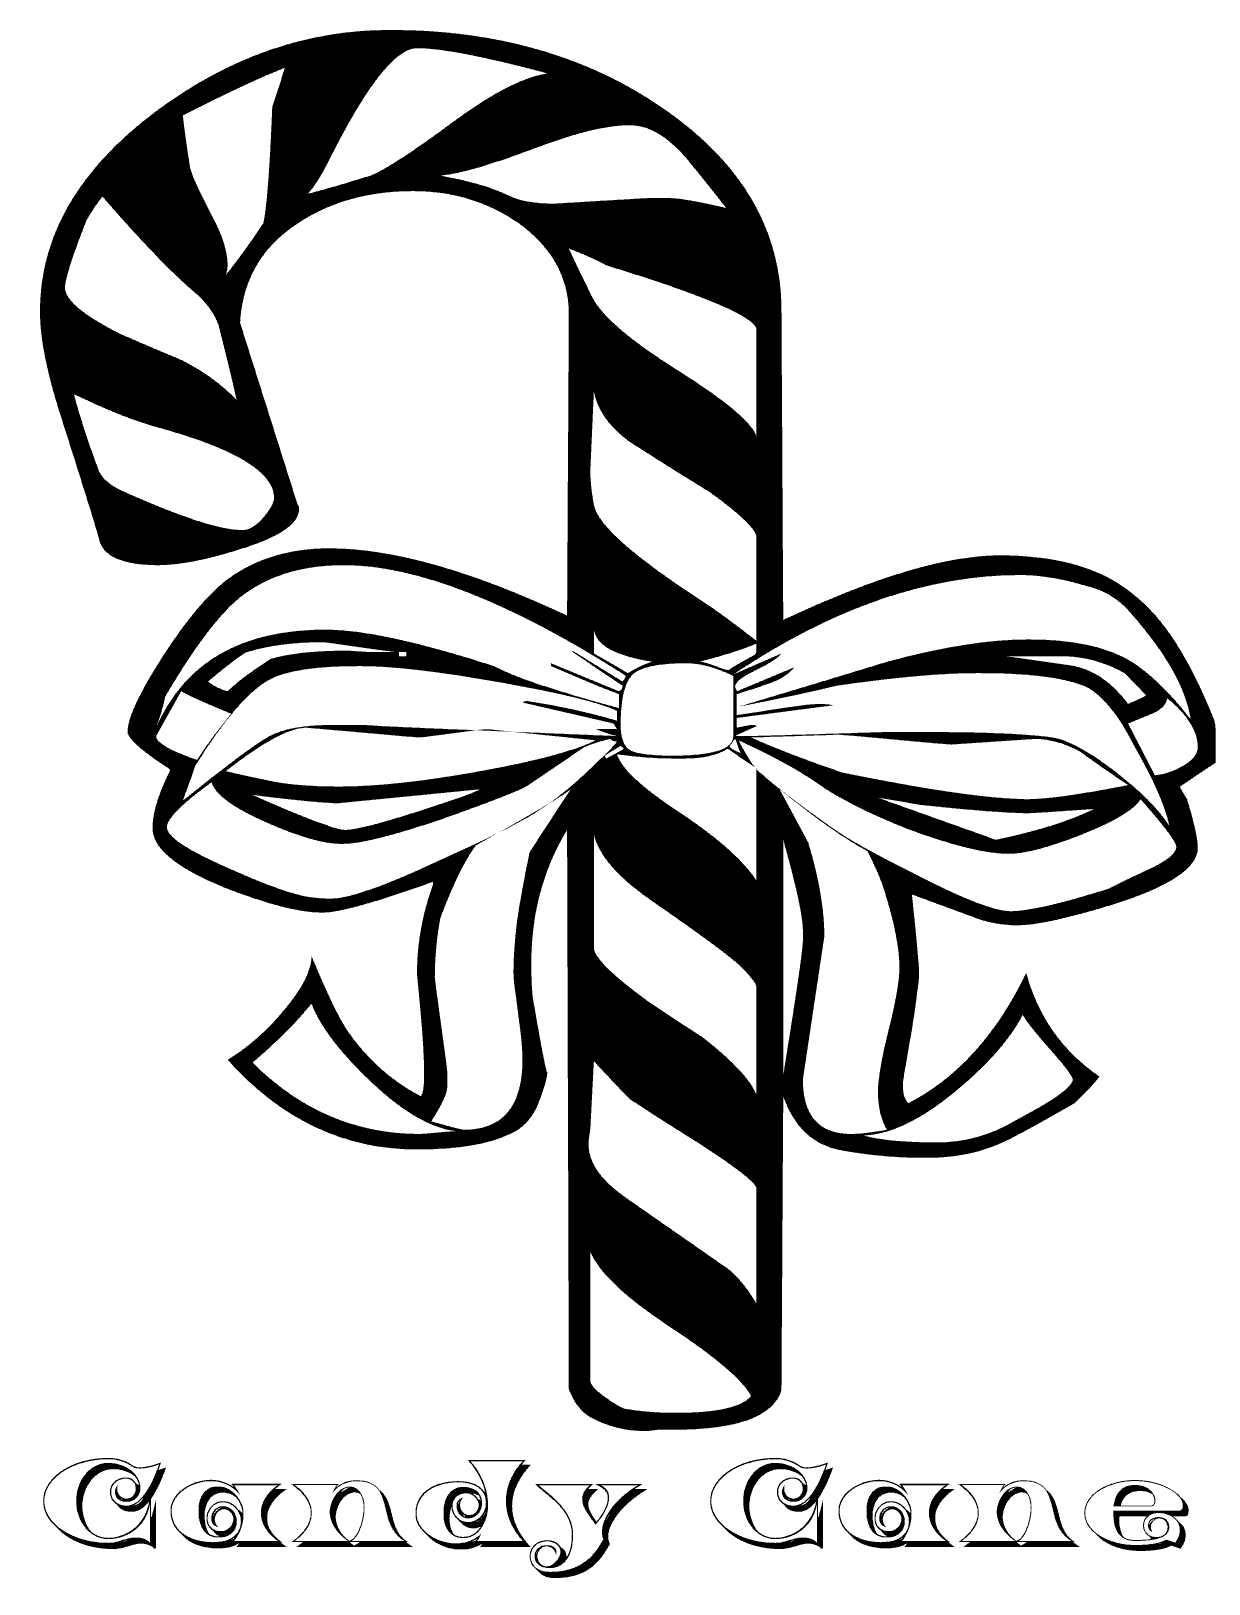 Candy Cane Coloring Pages Beautiful - Coloring pages